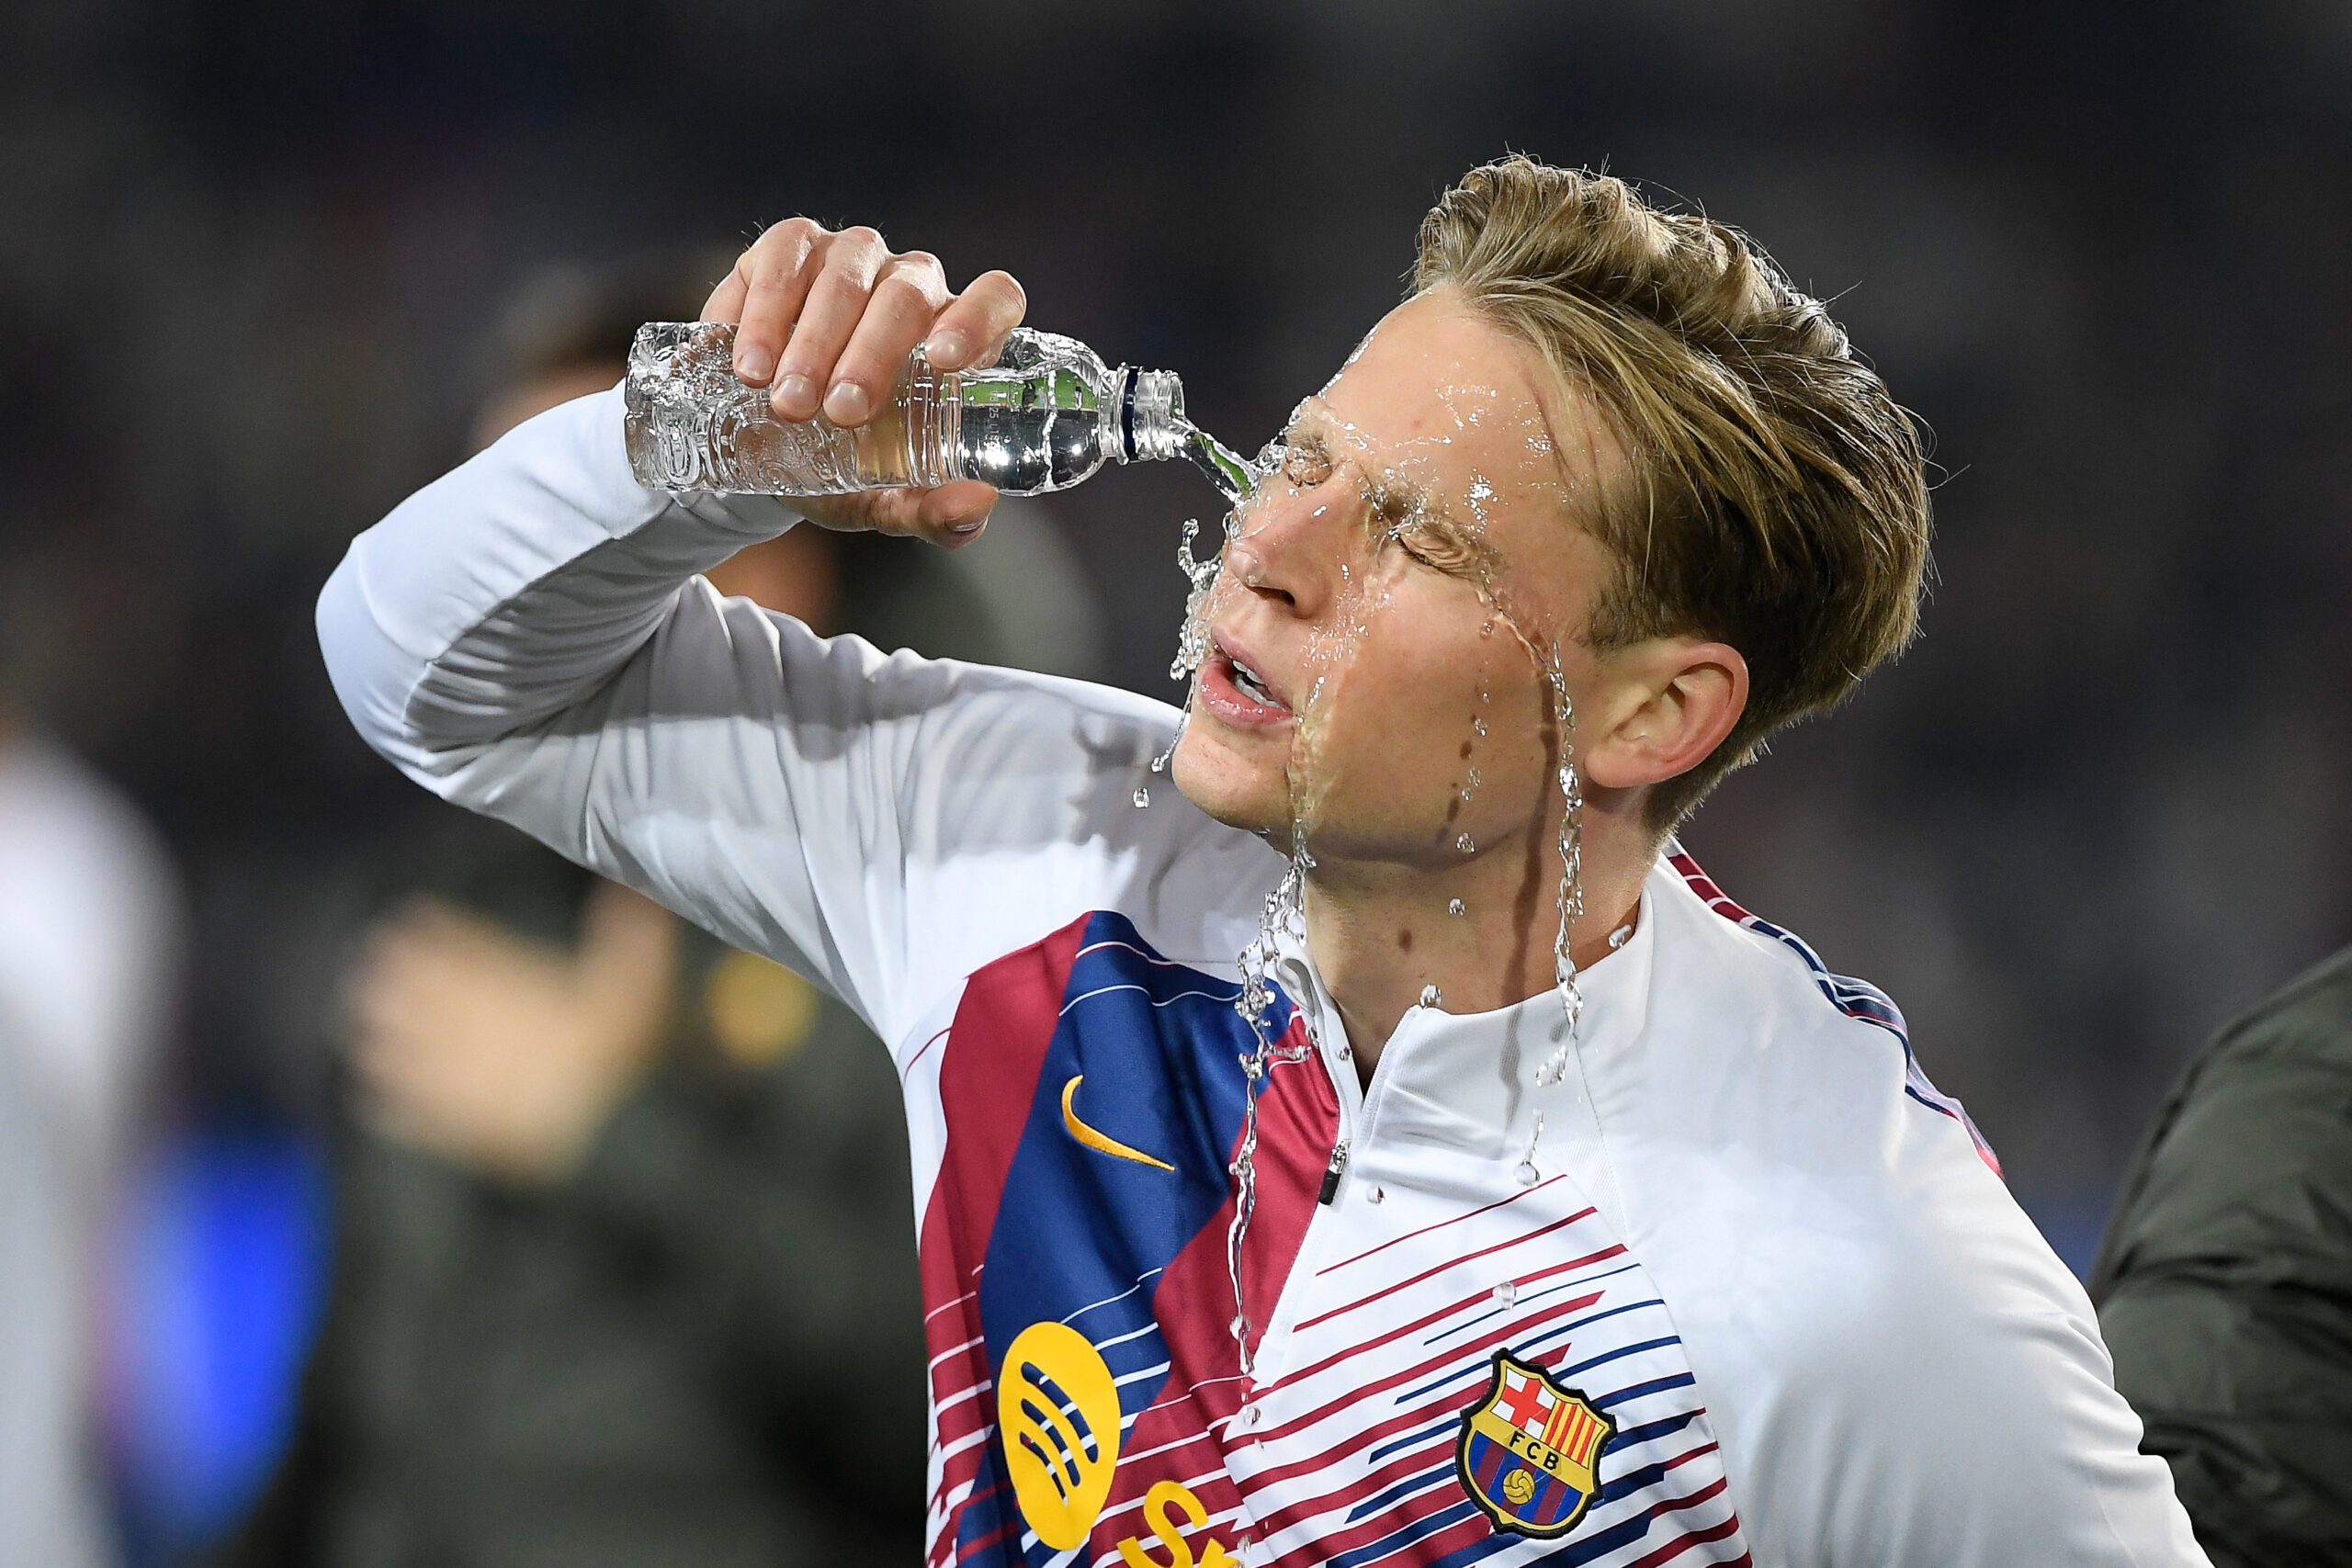 Barcelona's Dutch midfielder #21 Frenkie de Jong pours water on his face before the start of the UEFA Champions League first round group H football match between FC Barcelona and FC Porto at the Estadi Olimpic Lluis Companys in Barcelona on November 28, 2023.